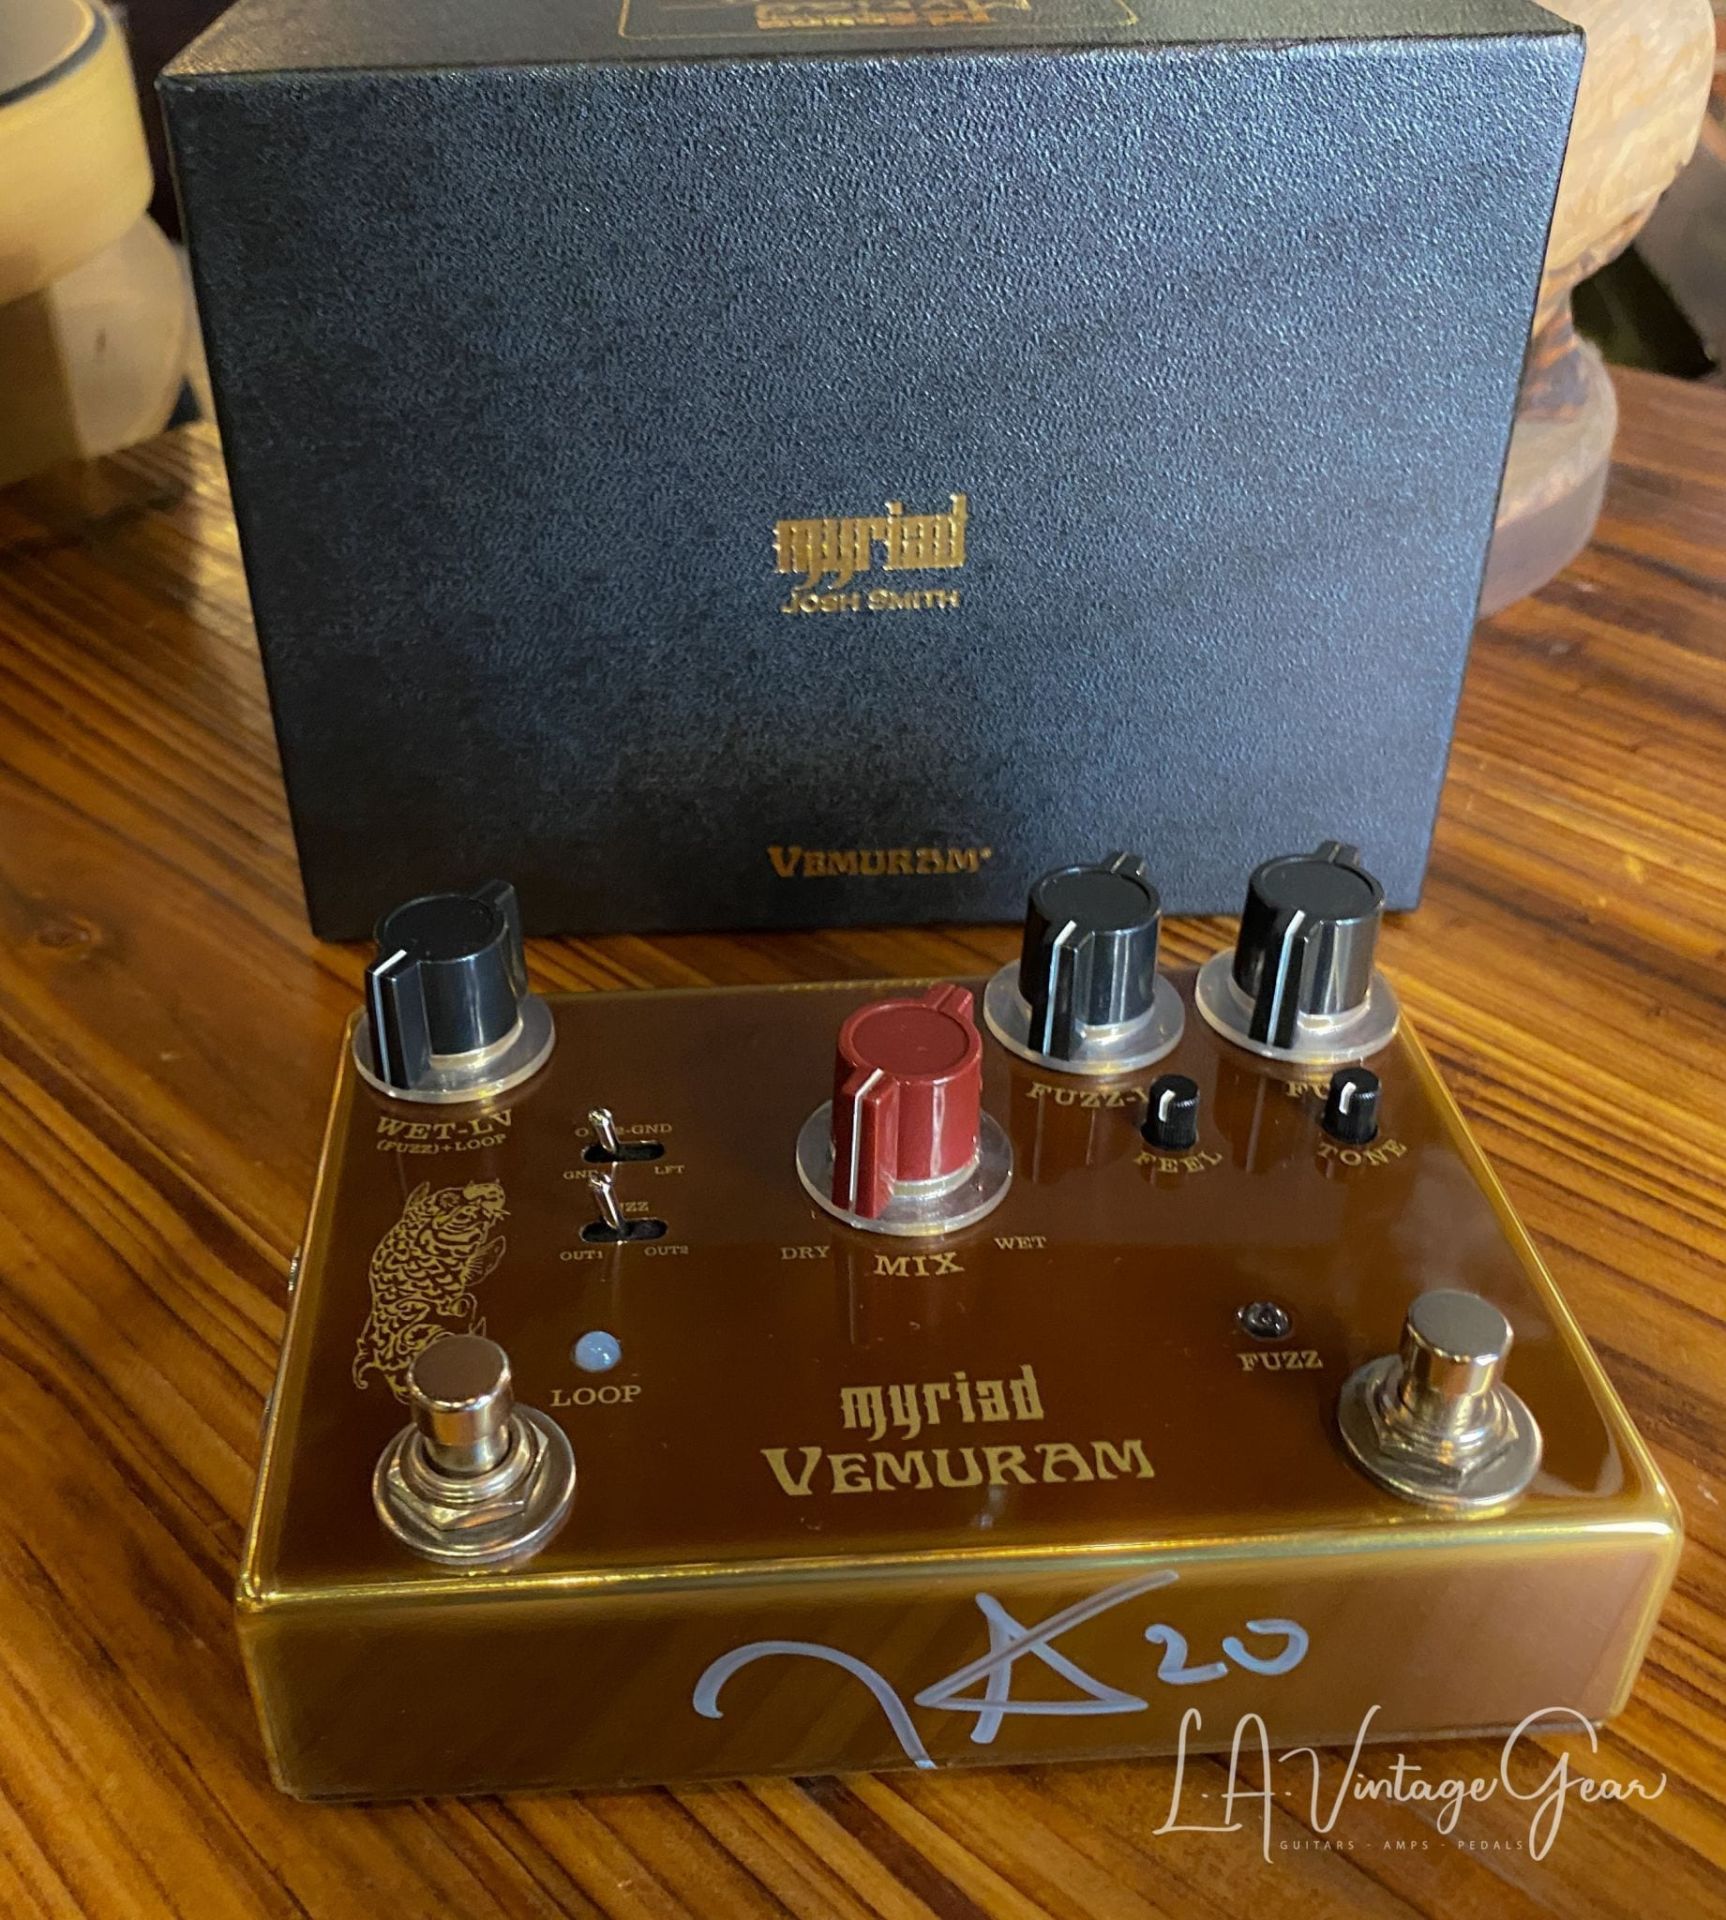 Vemuram Myriad Josh Smith Signature! Fuzz pedal with a loop and dry-mix